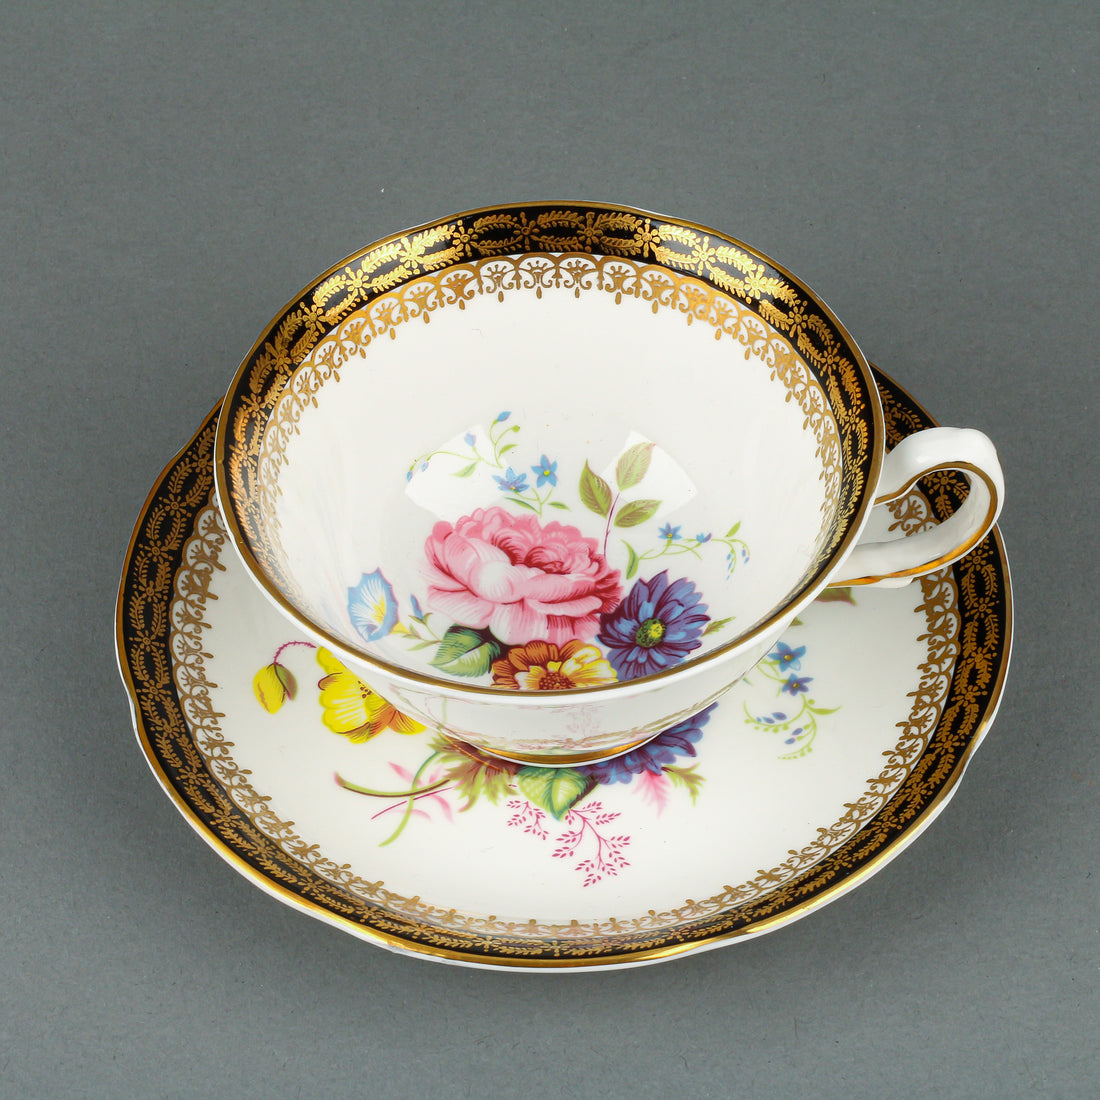 ROYAL GRAFTON Hand-Painted Black & Gold Rim Cup & Saucer Floral